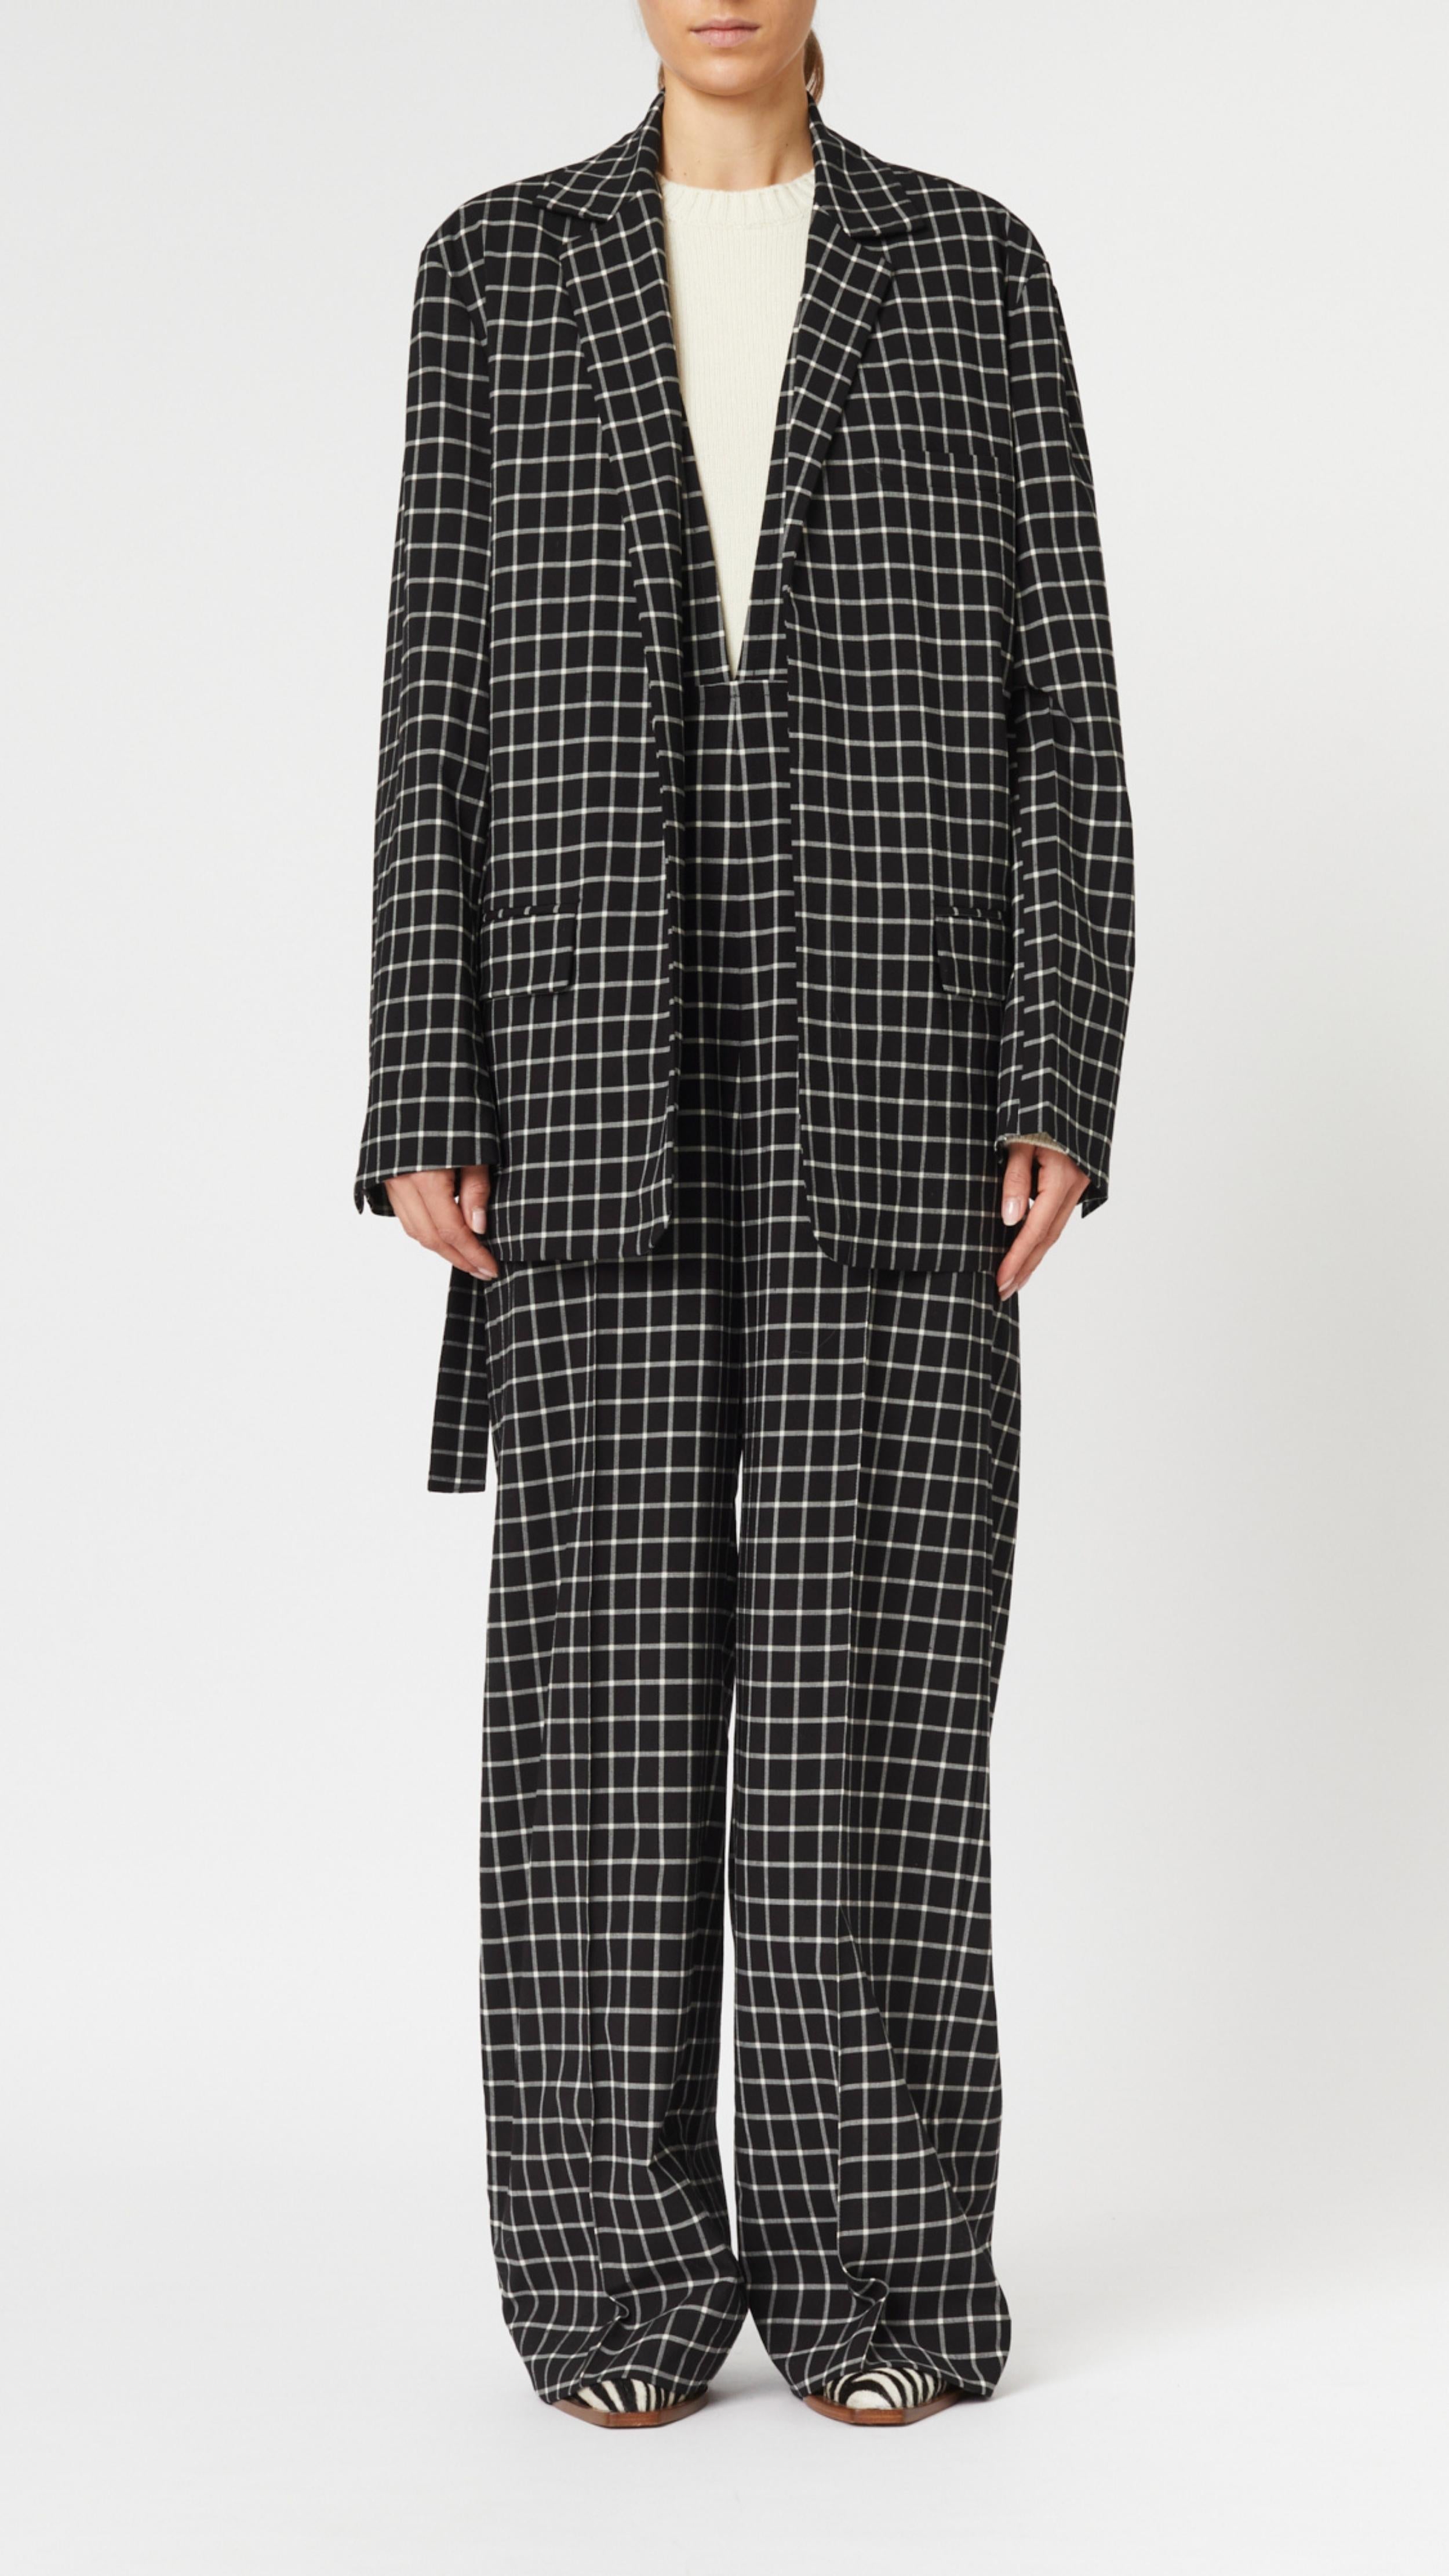 Plan C Checked Black Blazer. Modern suit jacket option in an oversized fit in lightweight wool. Classic black and white check pattern. Shown on model unbelted and open. Facing front.